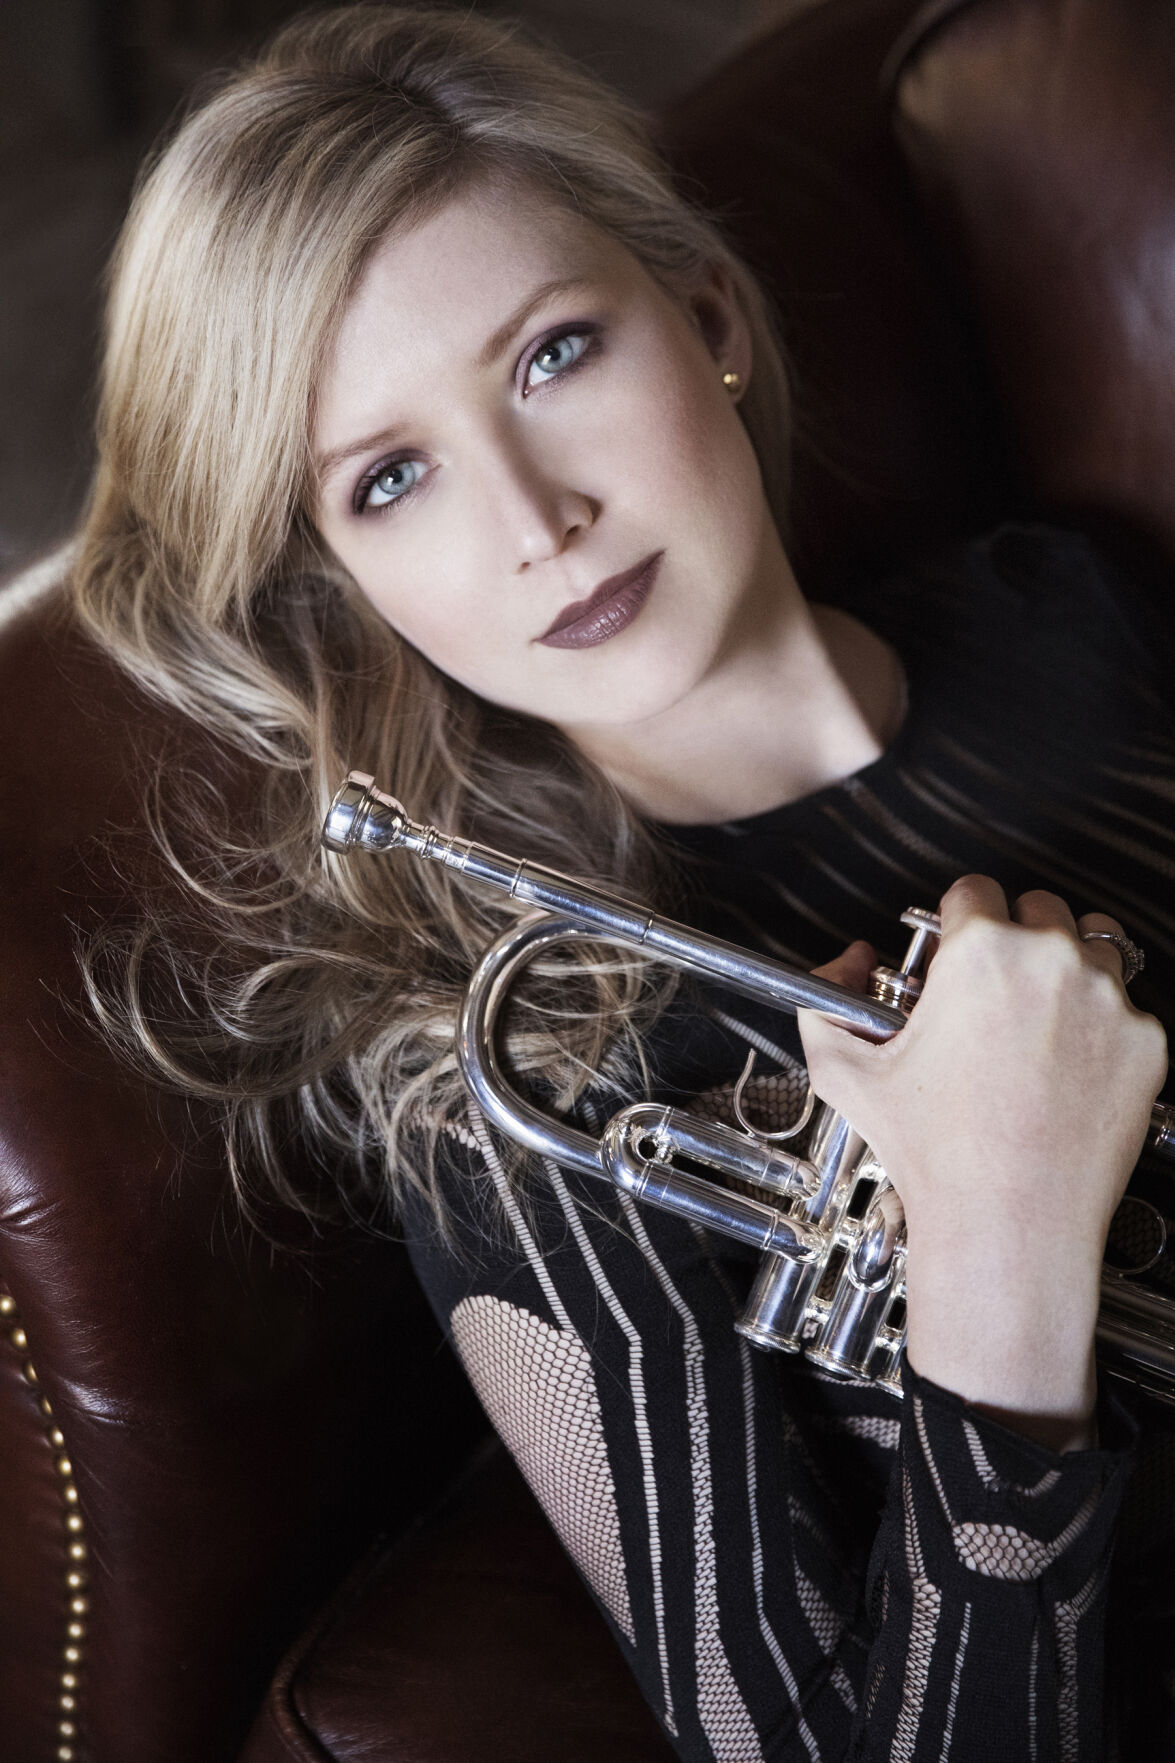 Women of Brass: Mary Elizabeth Bowden on Founding the All-Female